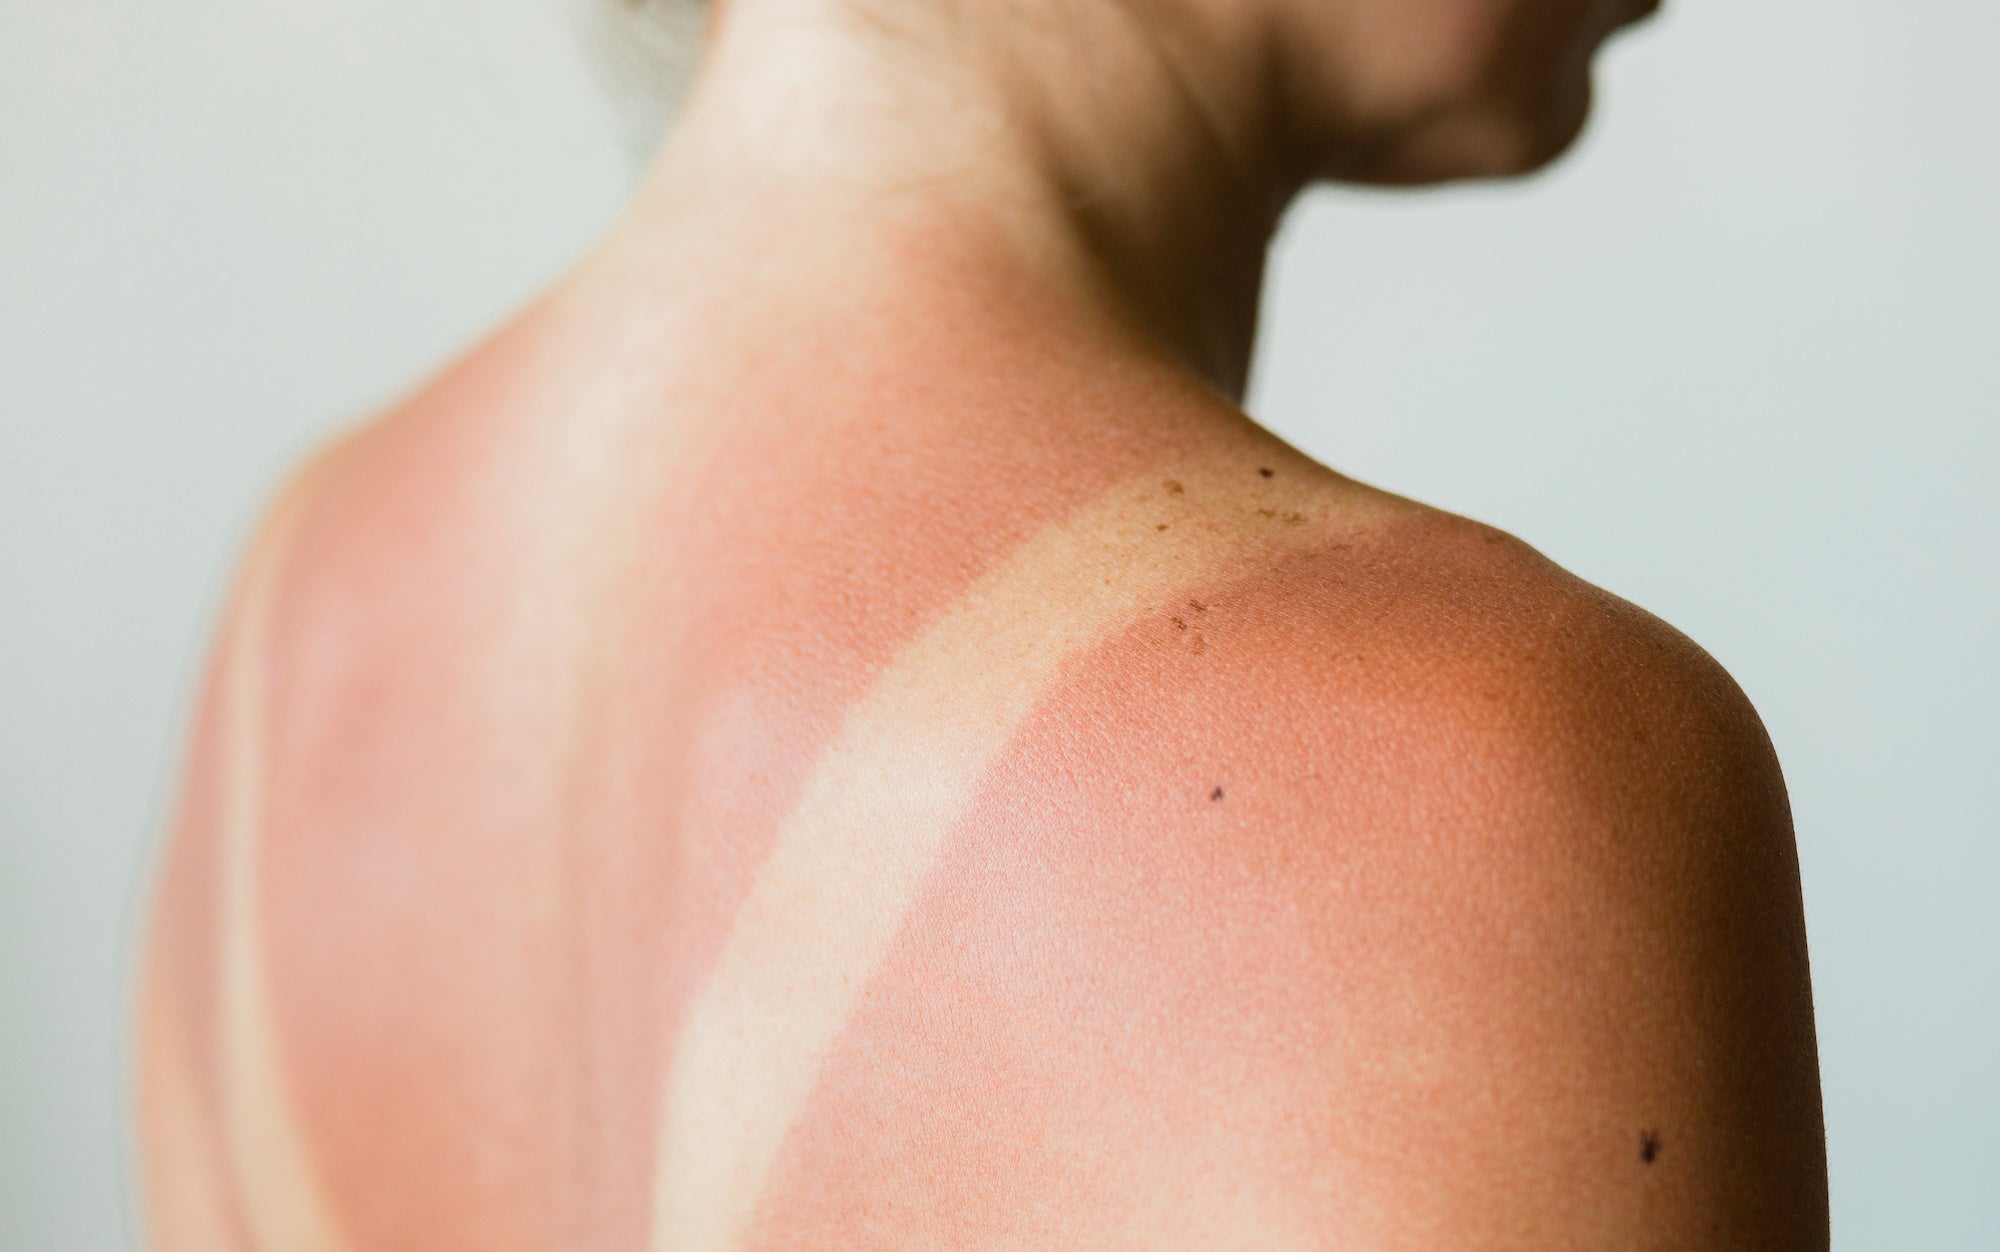 So You Forgot Sunscreen? Here's What Dermatologists Recommend to Ease the Burn